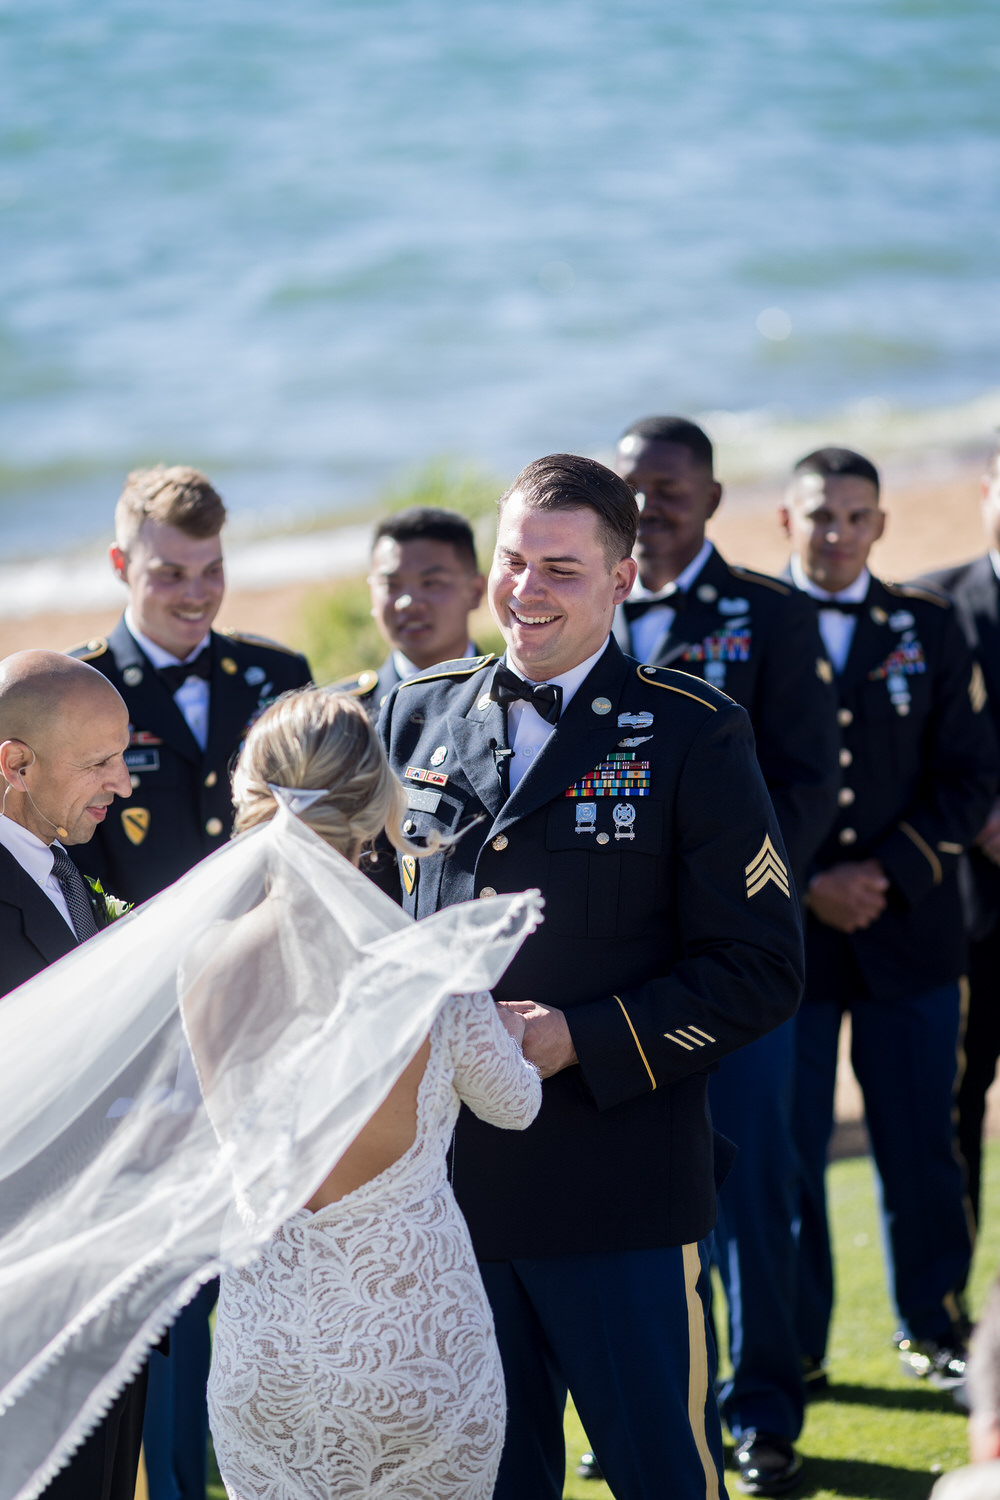 A groom in dress blues reads vows to his bride at a Lake Tahoe military wedding.